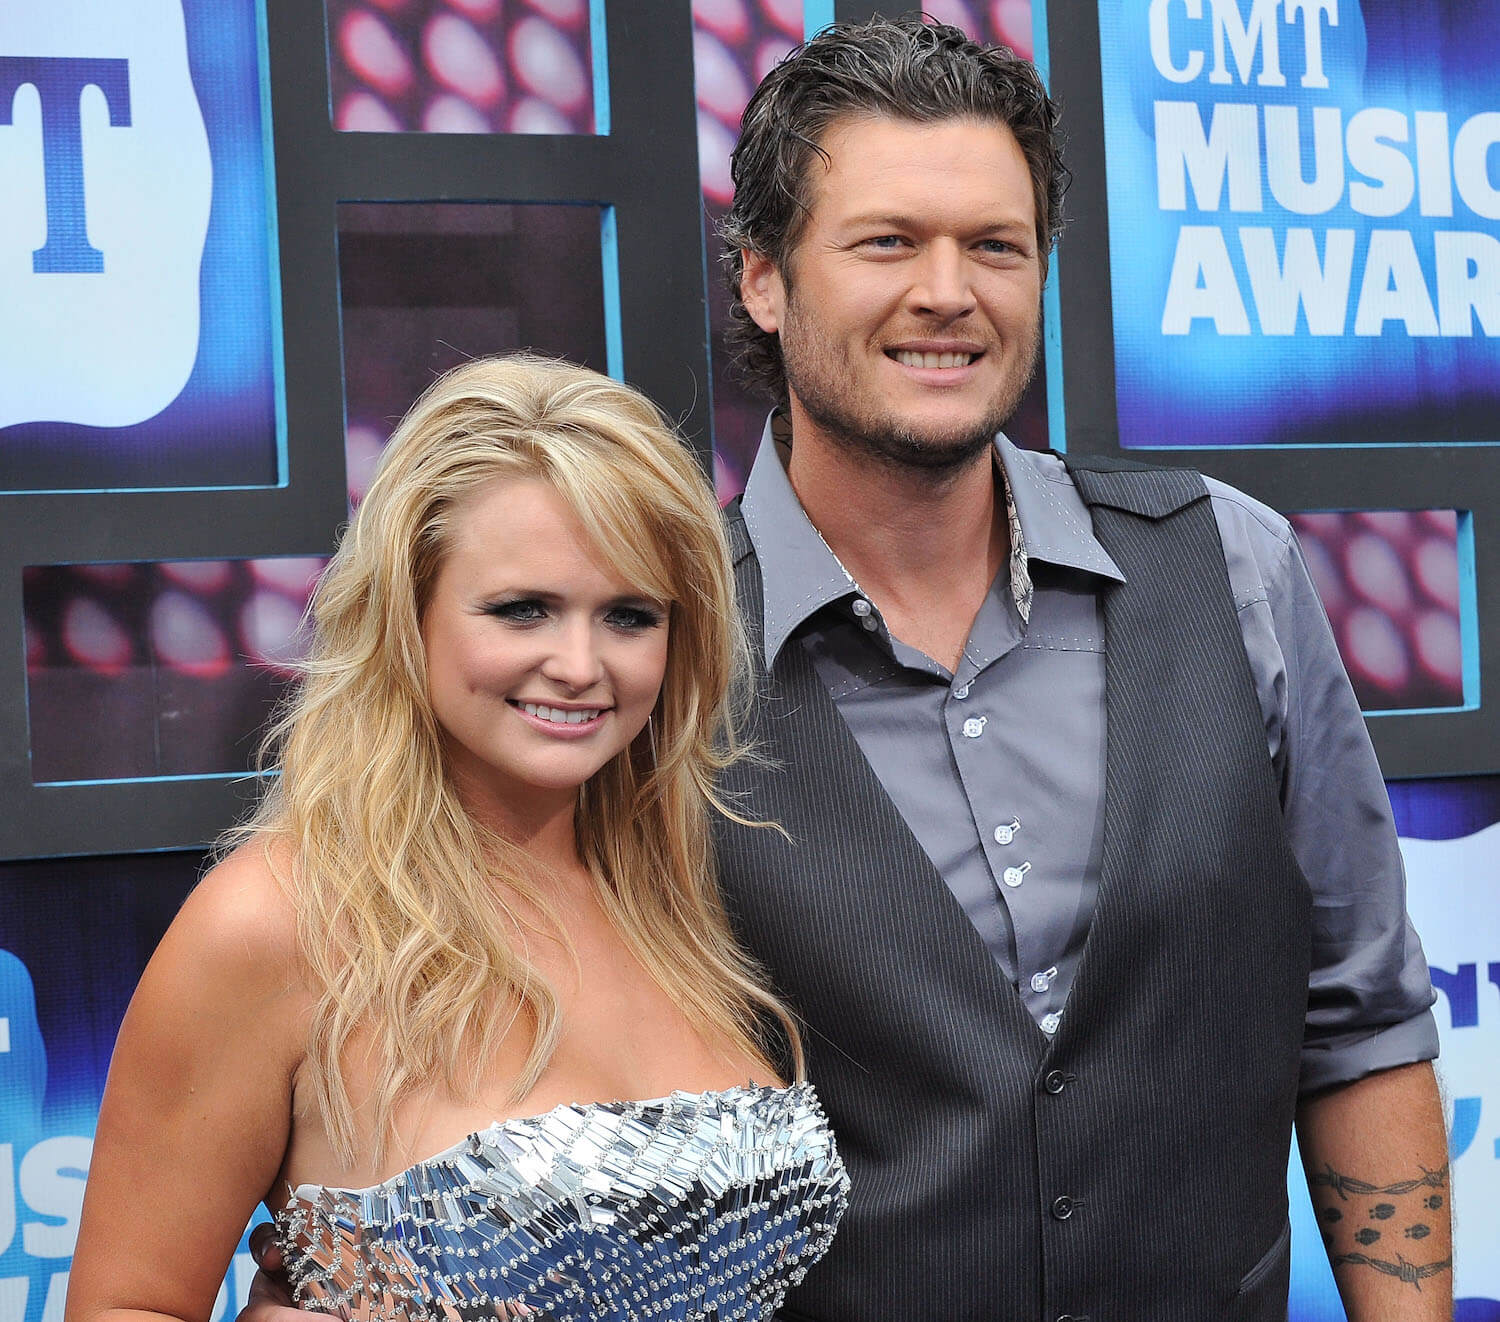 Miranda Lambert and Blake Shelton with their arms around each other and smiling at the 2010 Country Music Awards